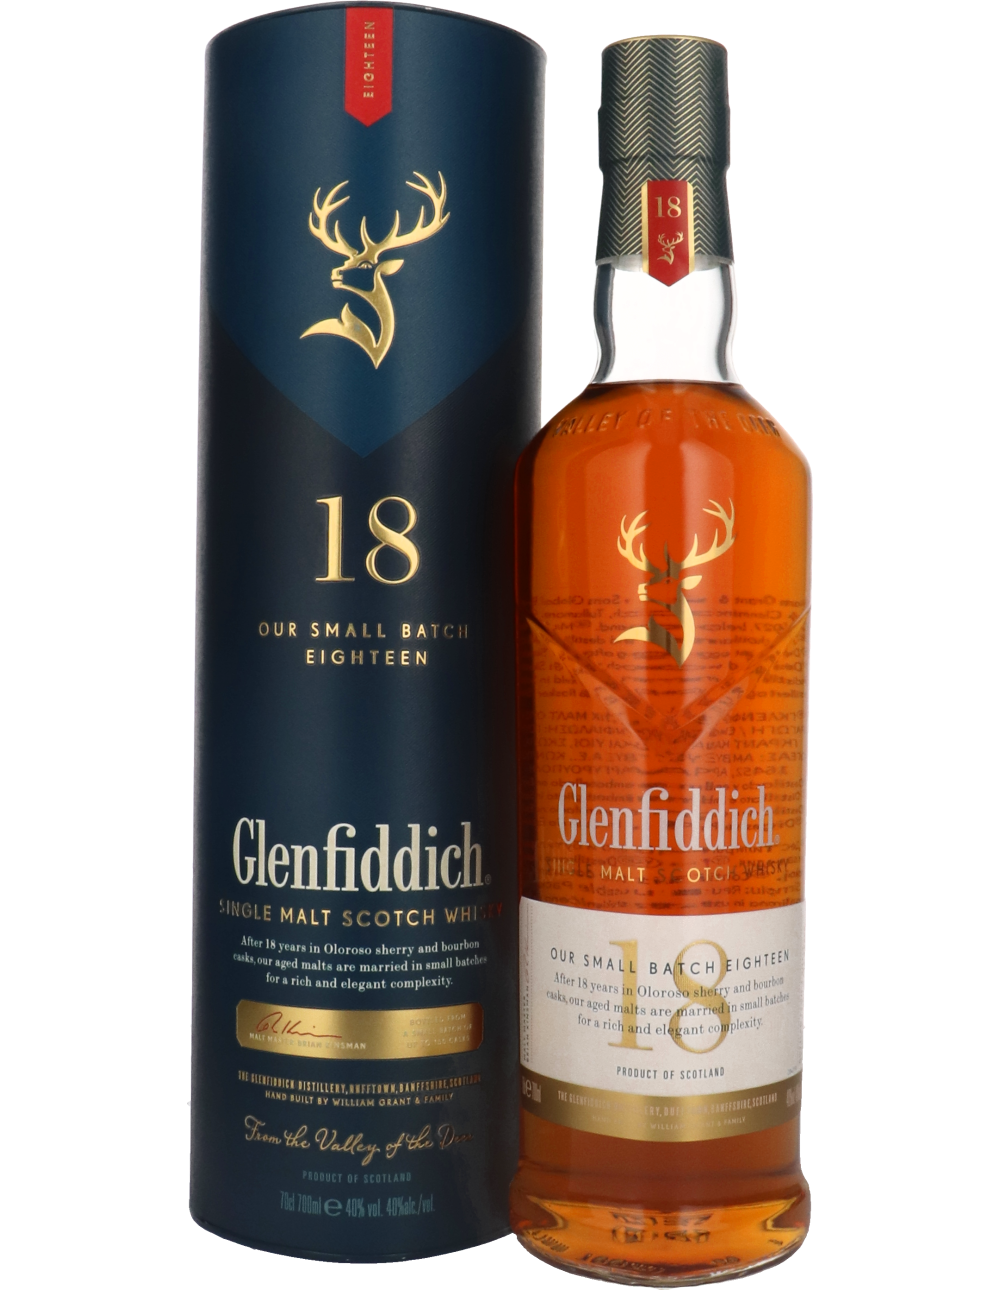 Glenfiddich 18 years old 